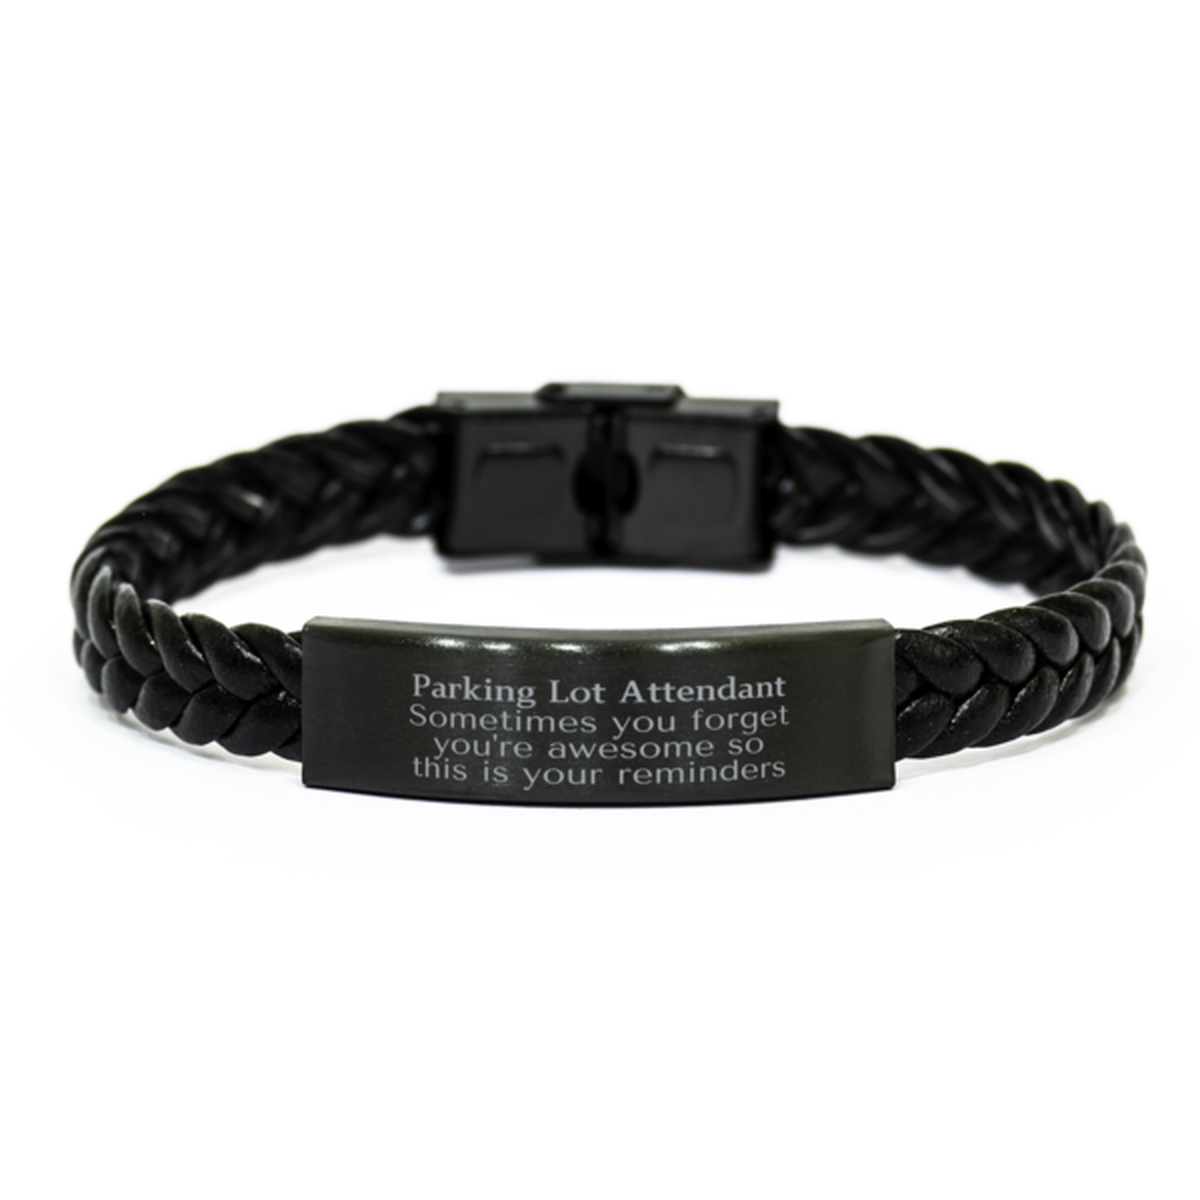 Sentimental Parking Lot Attendant Braided Leather Bracelet, Parking Lot Attendant Sometimes you forget you're awesome so this is your reminders, Graduation Christmas Birthday Gifts for Parking Lot Attendant, Men, Women, Coworkers